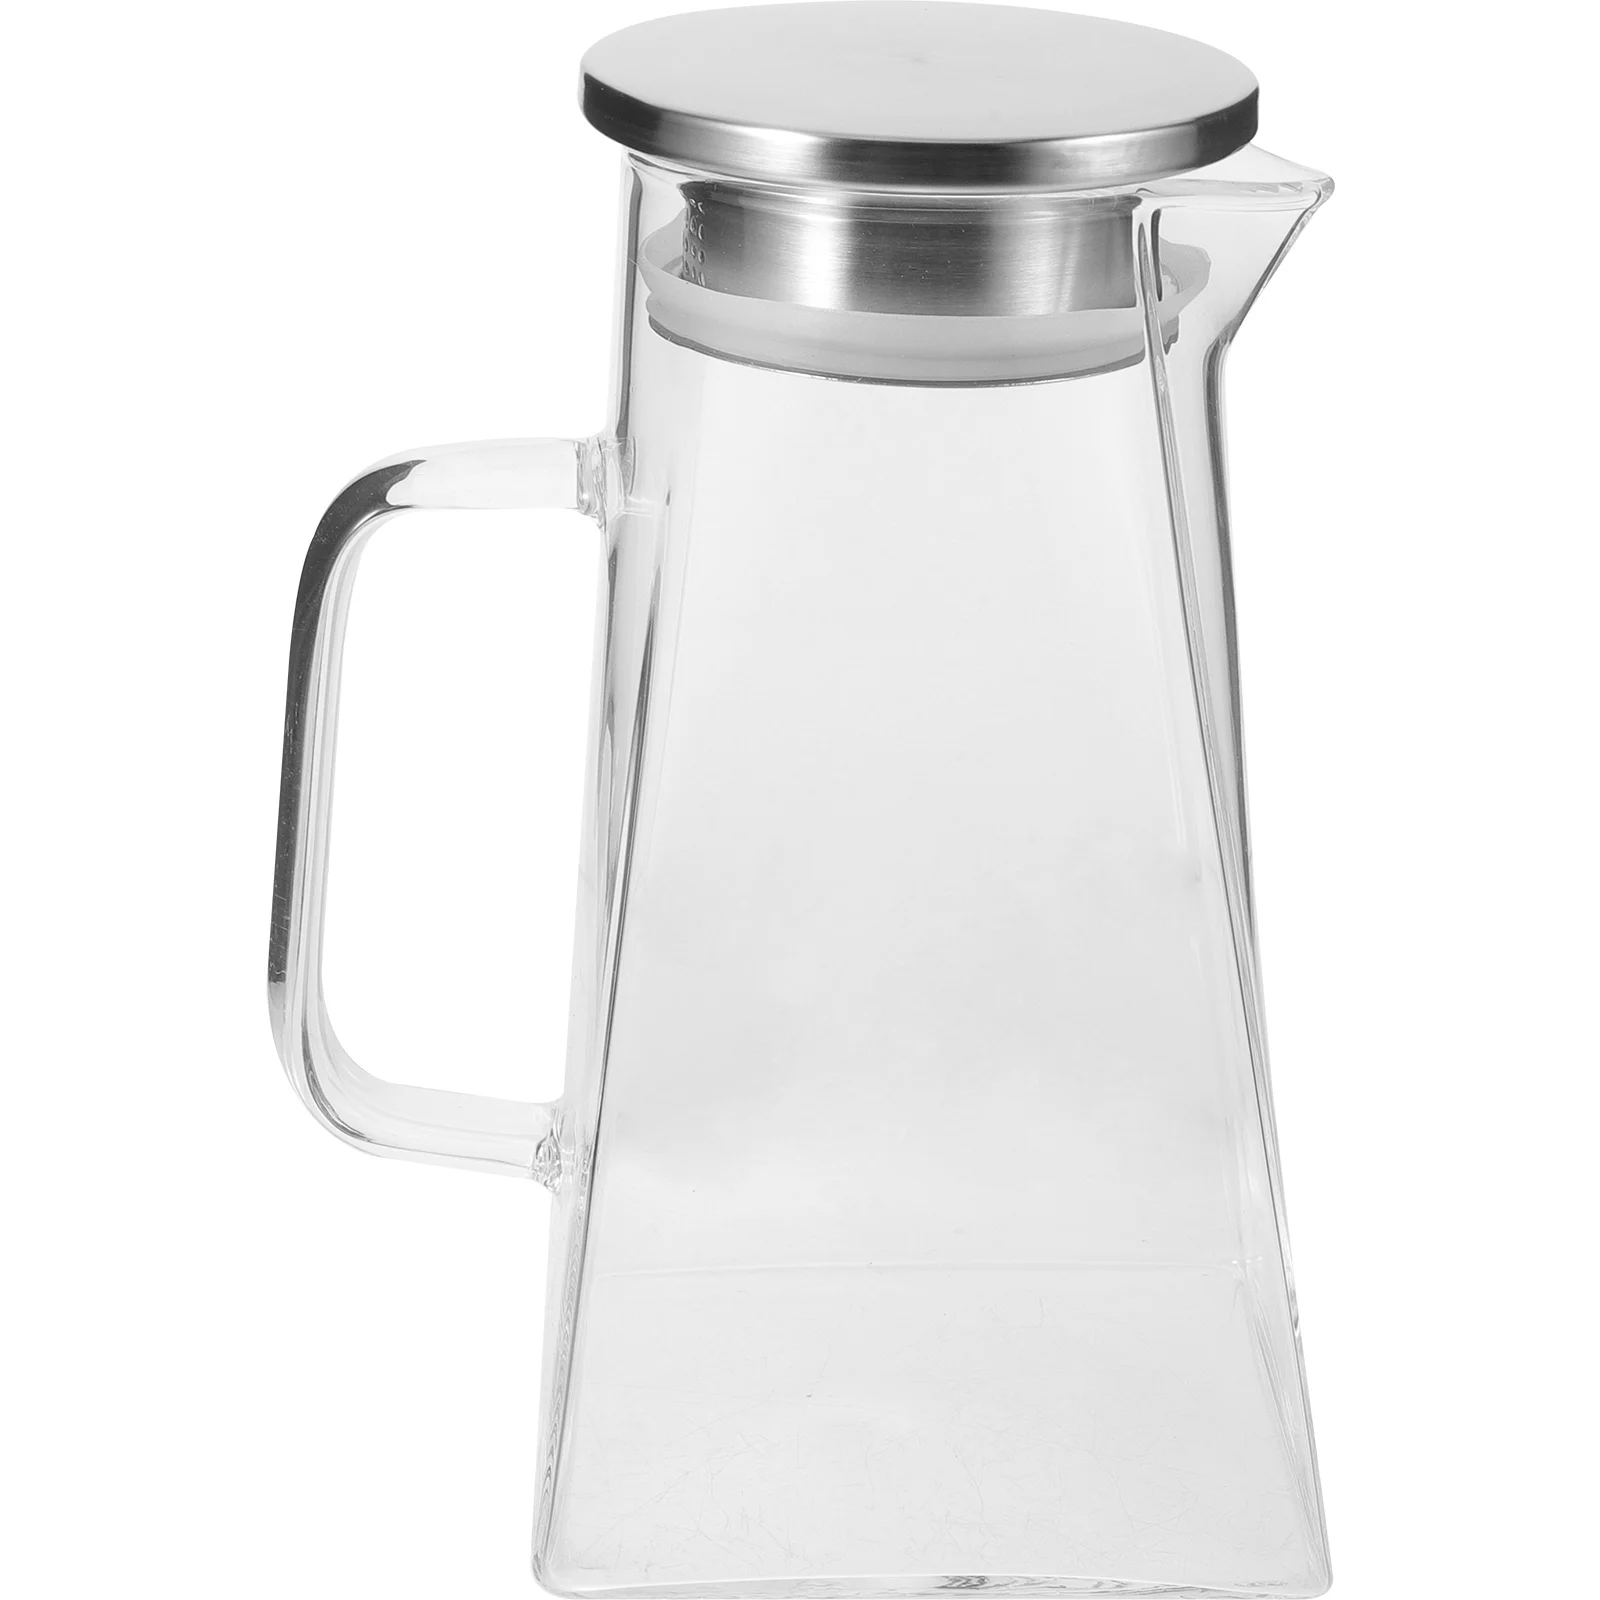 

Water Carafe Pitcher Tea Beverage Kettle Decanter Tumbler Night Bedside Maker Fridge Ice Dispensers Containers Juice Clear